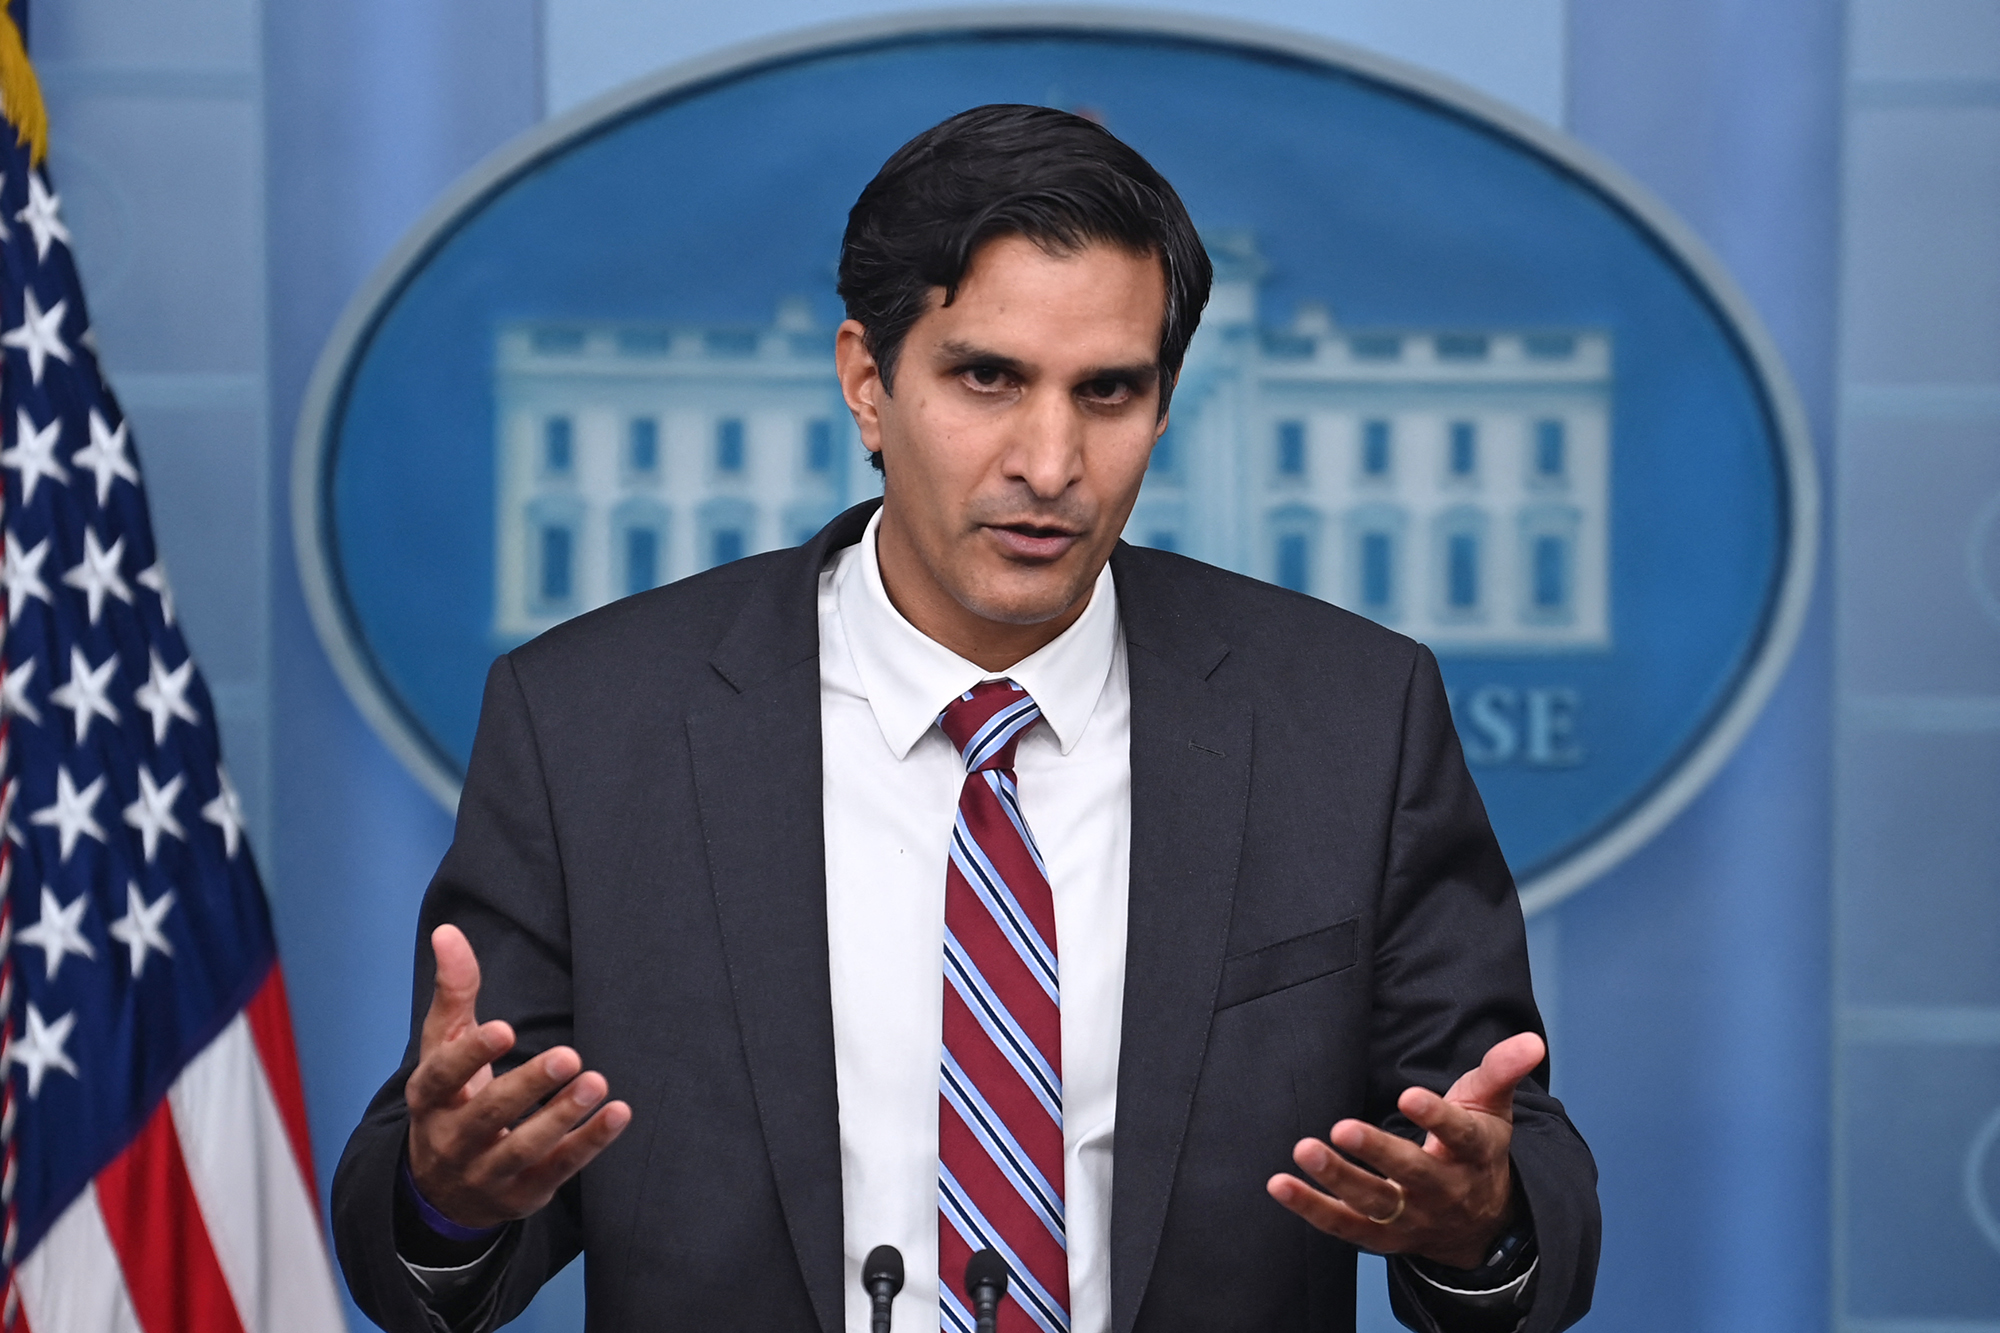 Deputy National Security Advisor Daleep Singh speaks during a press briefing in the Brady Briefing Room of the White House in Washington, DC, on February 24.